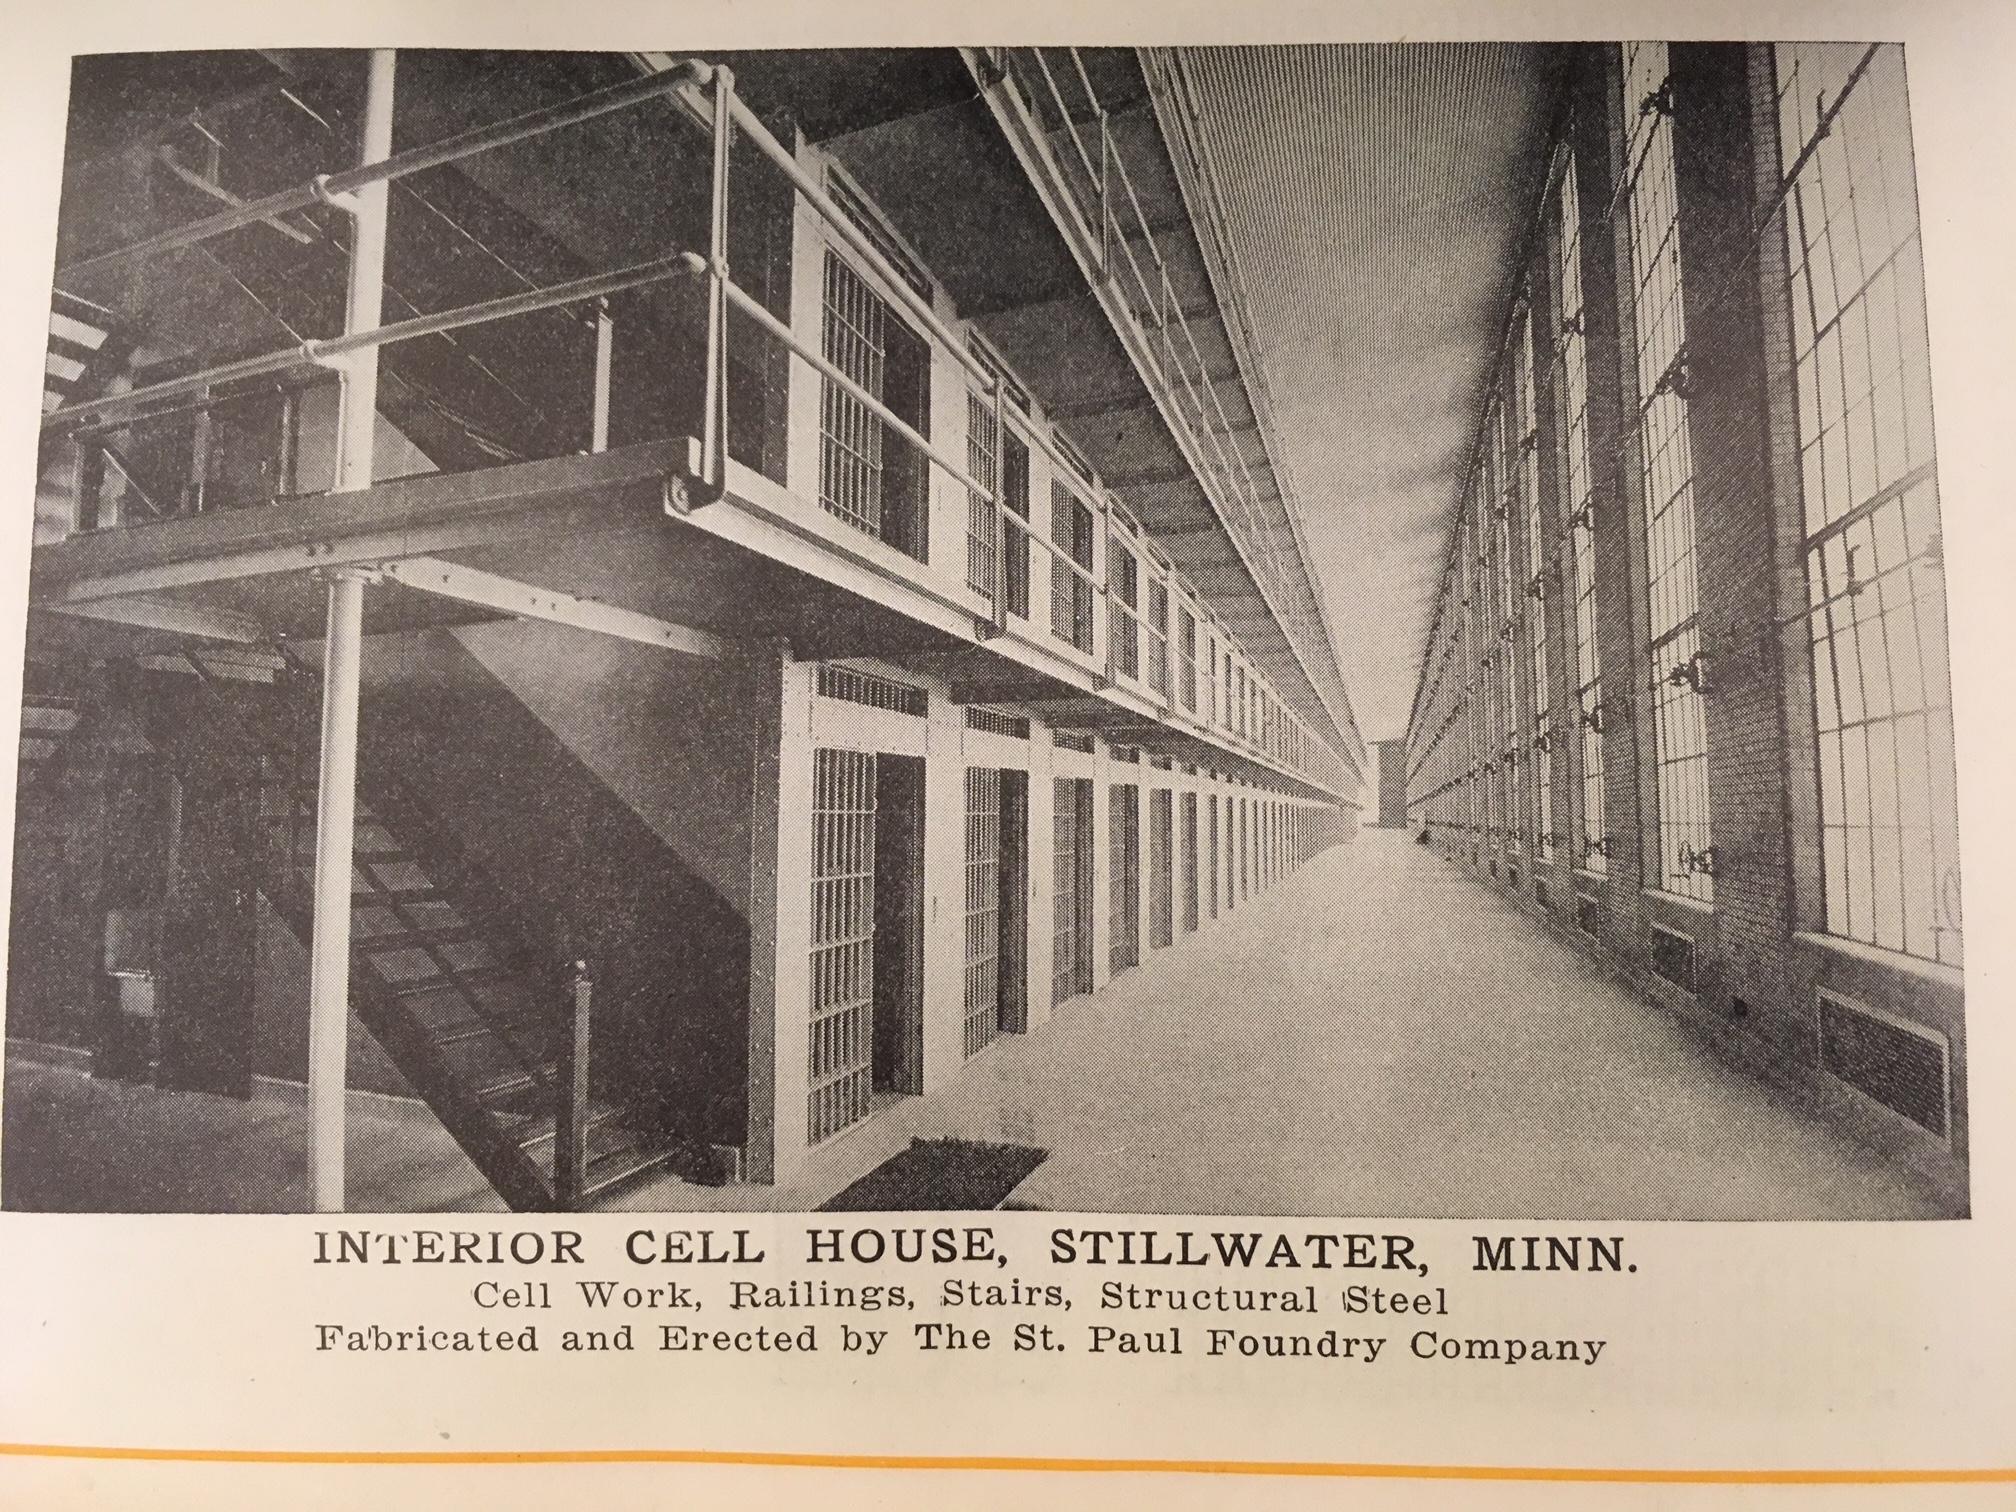 Stillwater prison advertisement in a St. Paul Foundry catalog. The foundry made the steel for prisons in Minnesota, Washington State, Missouri, Illinois, Colorado, and Michigan.